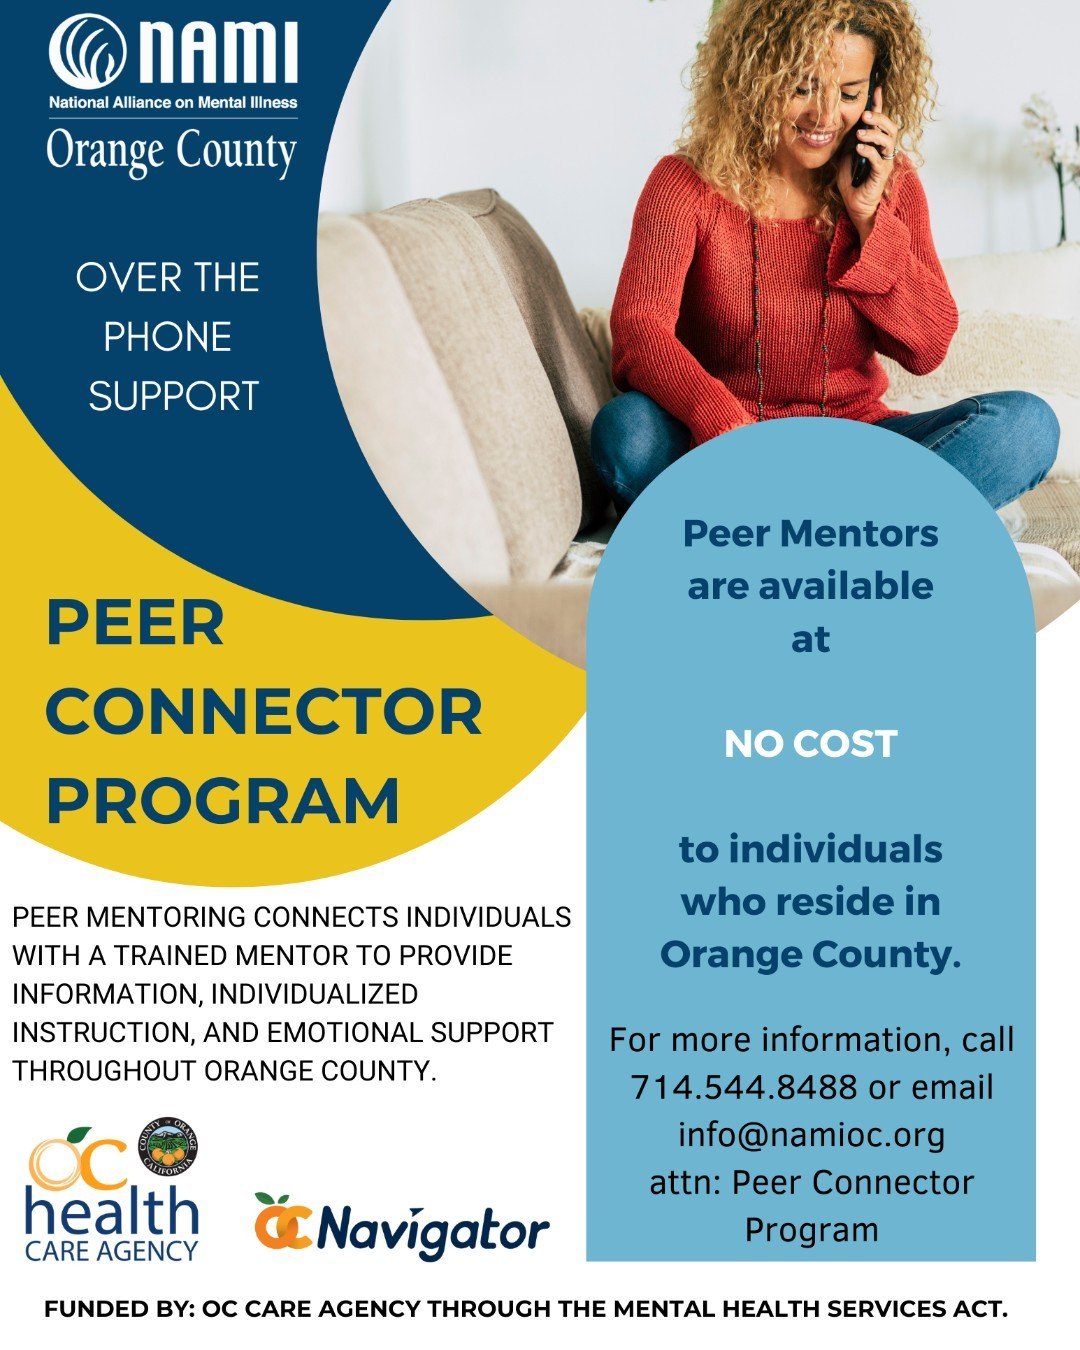 Peer Mentoring offers personalized guidance, resources, and emotional support all across Orange County at no cost!

Connect today:
📞 714.544.8488
📧 info@namioc.org

#PeerConnector #PeerConnectorProgram #PeerMentoring #PeerSupport #NAMI #Namiorangec